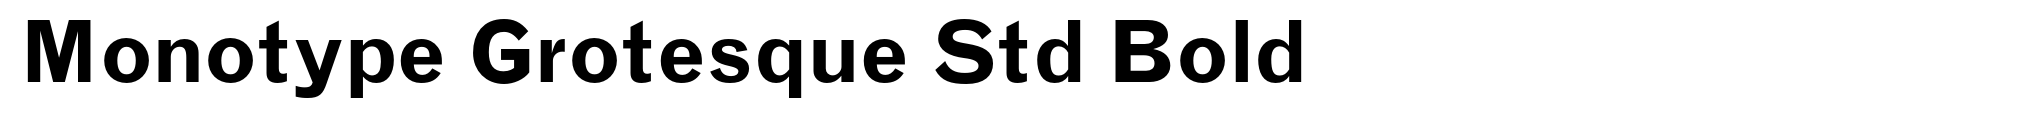 Monotype Grotesque Std Bold image